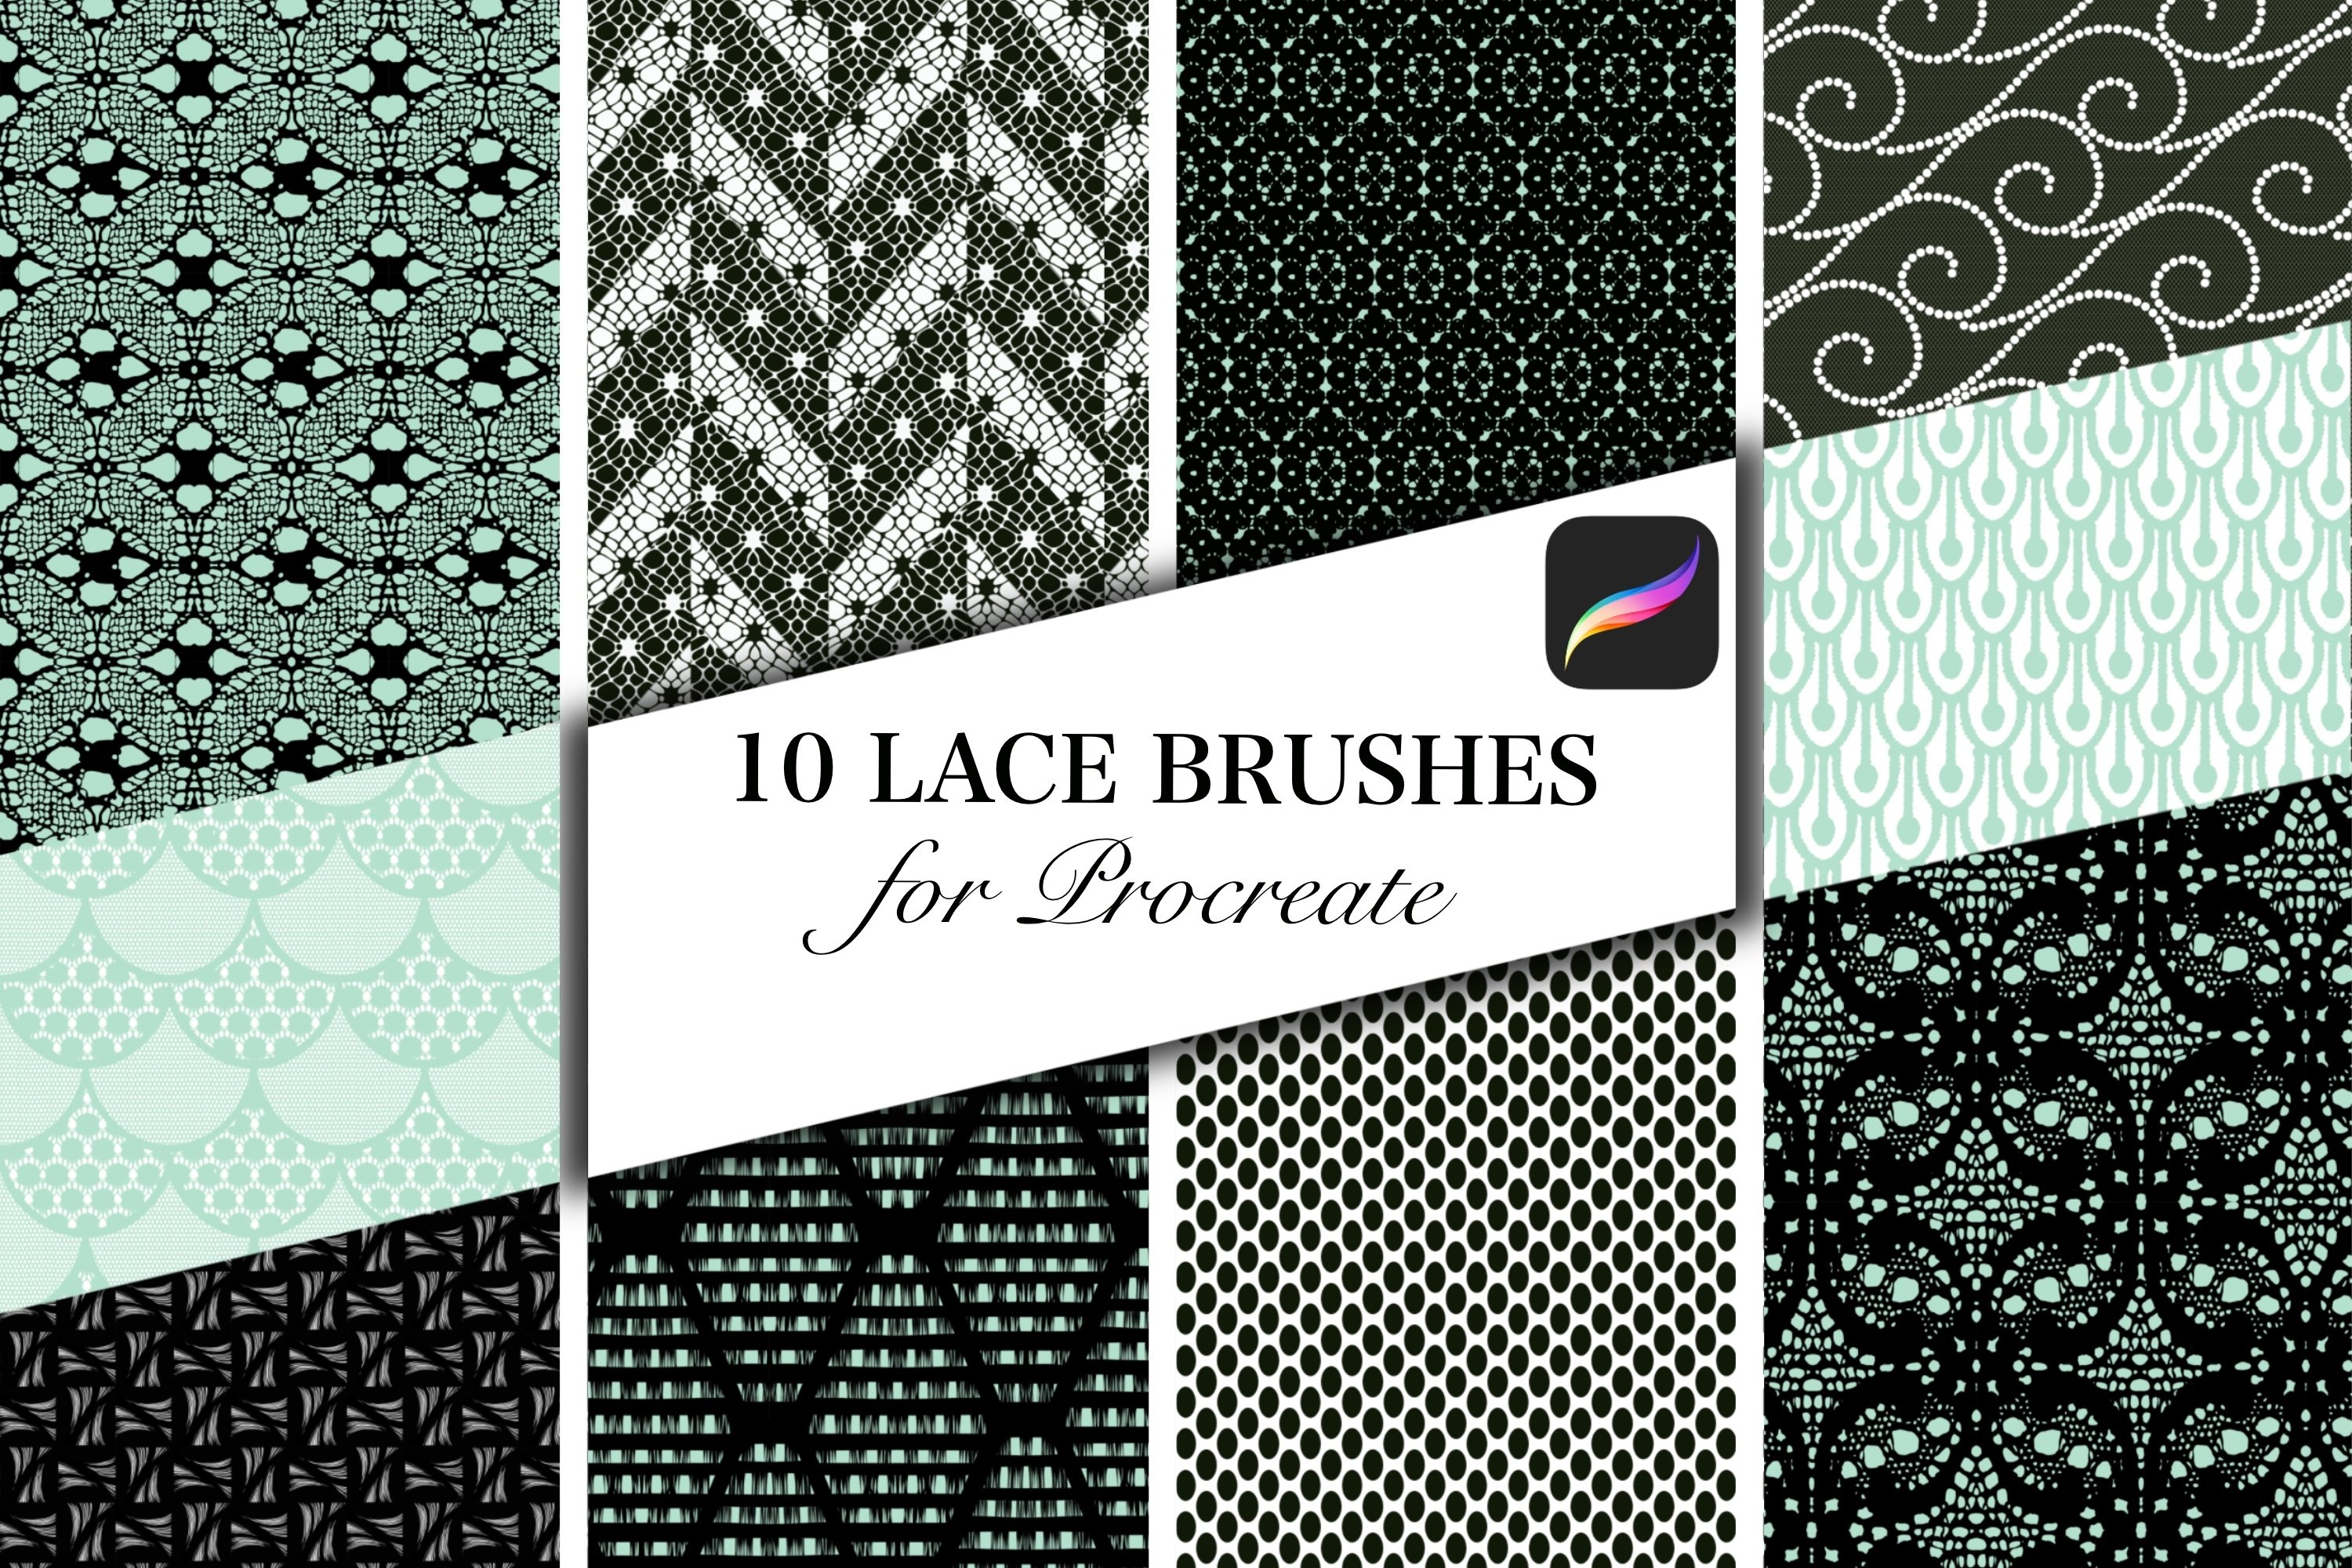 10 Lace Brushes For Procreate.